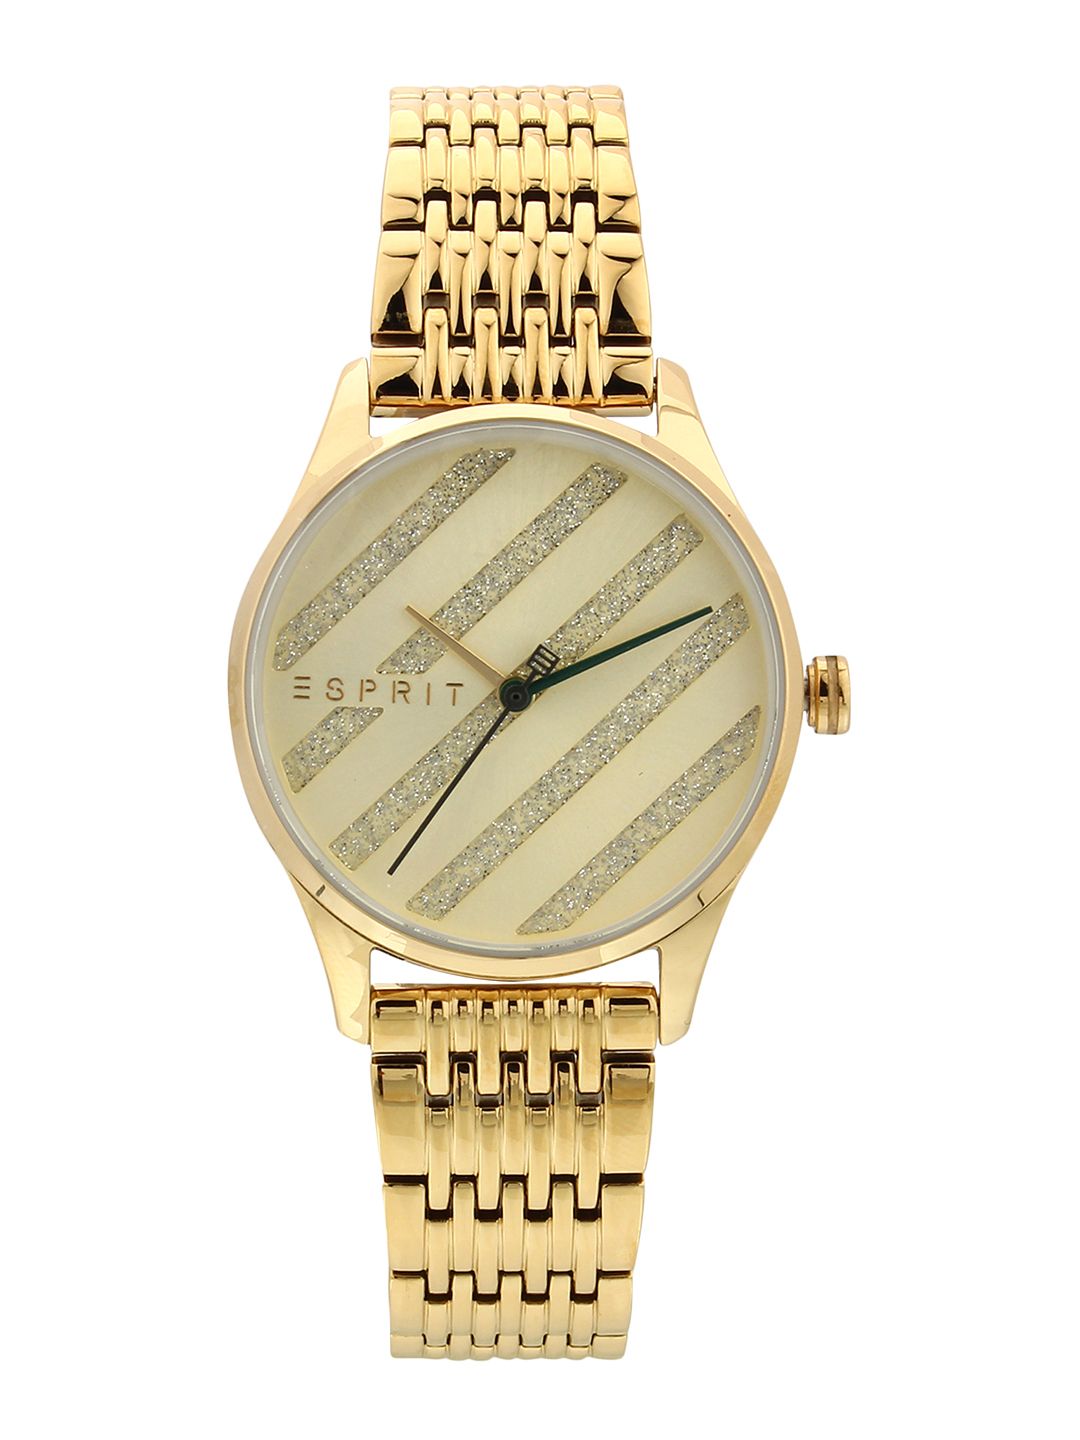 ESPRIT Women Gold-Toned Embellished Analogue Watch ES1L029M0055 Price in India